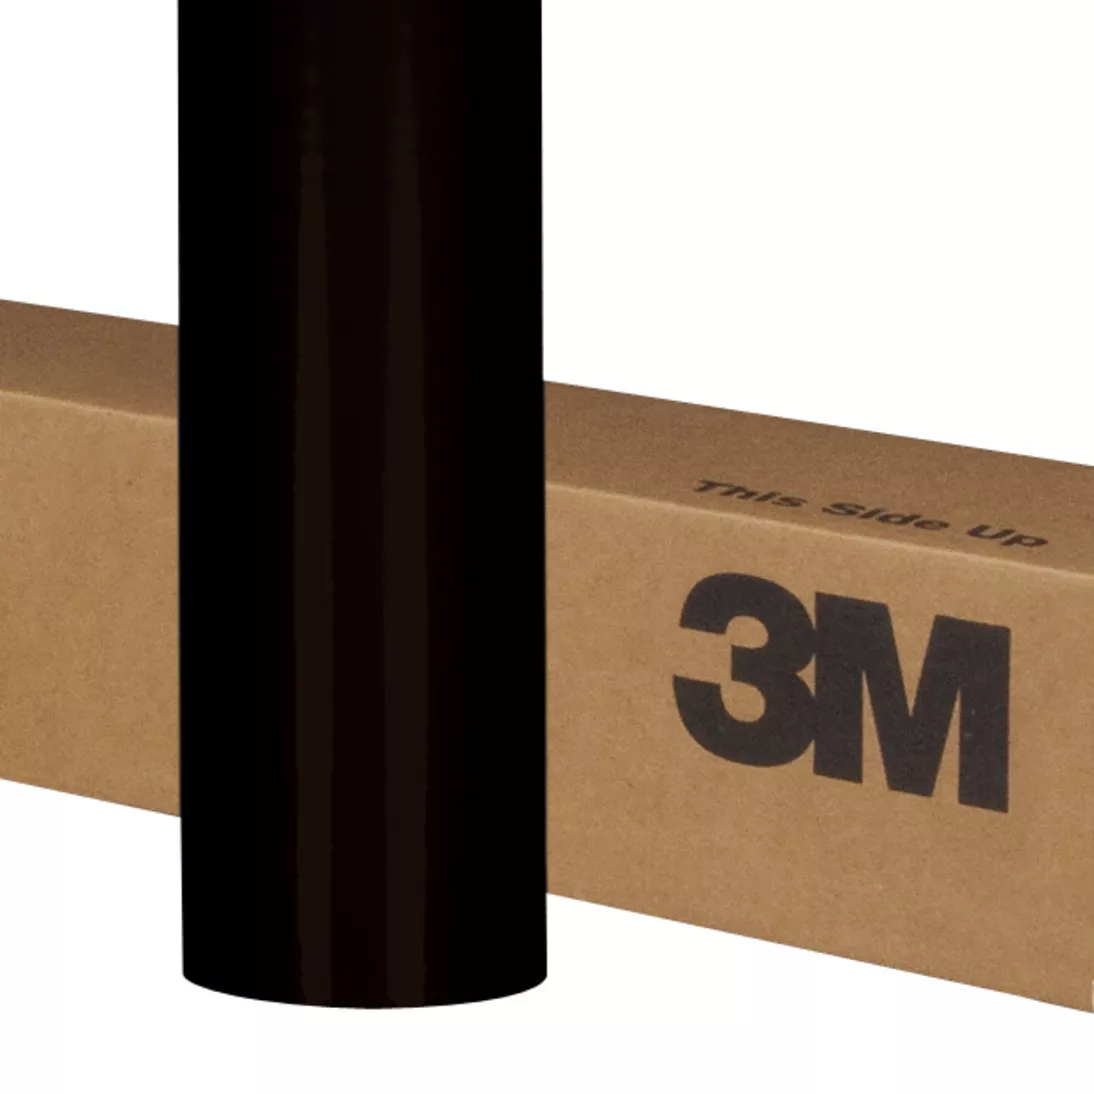 3M™ Scotchcal™ ElectroCut™ Graphic Film 7125-19, Deep Mahogany Brown, 48
in x 50 yd